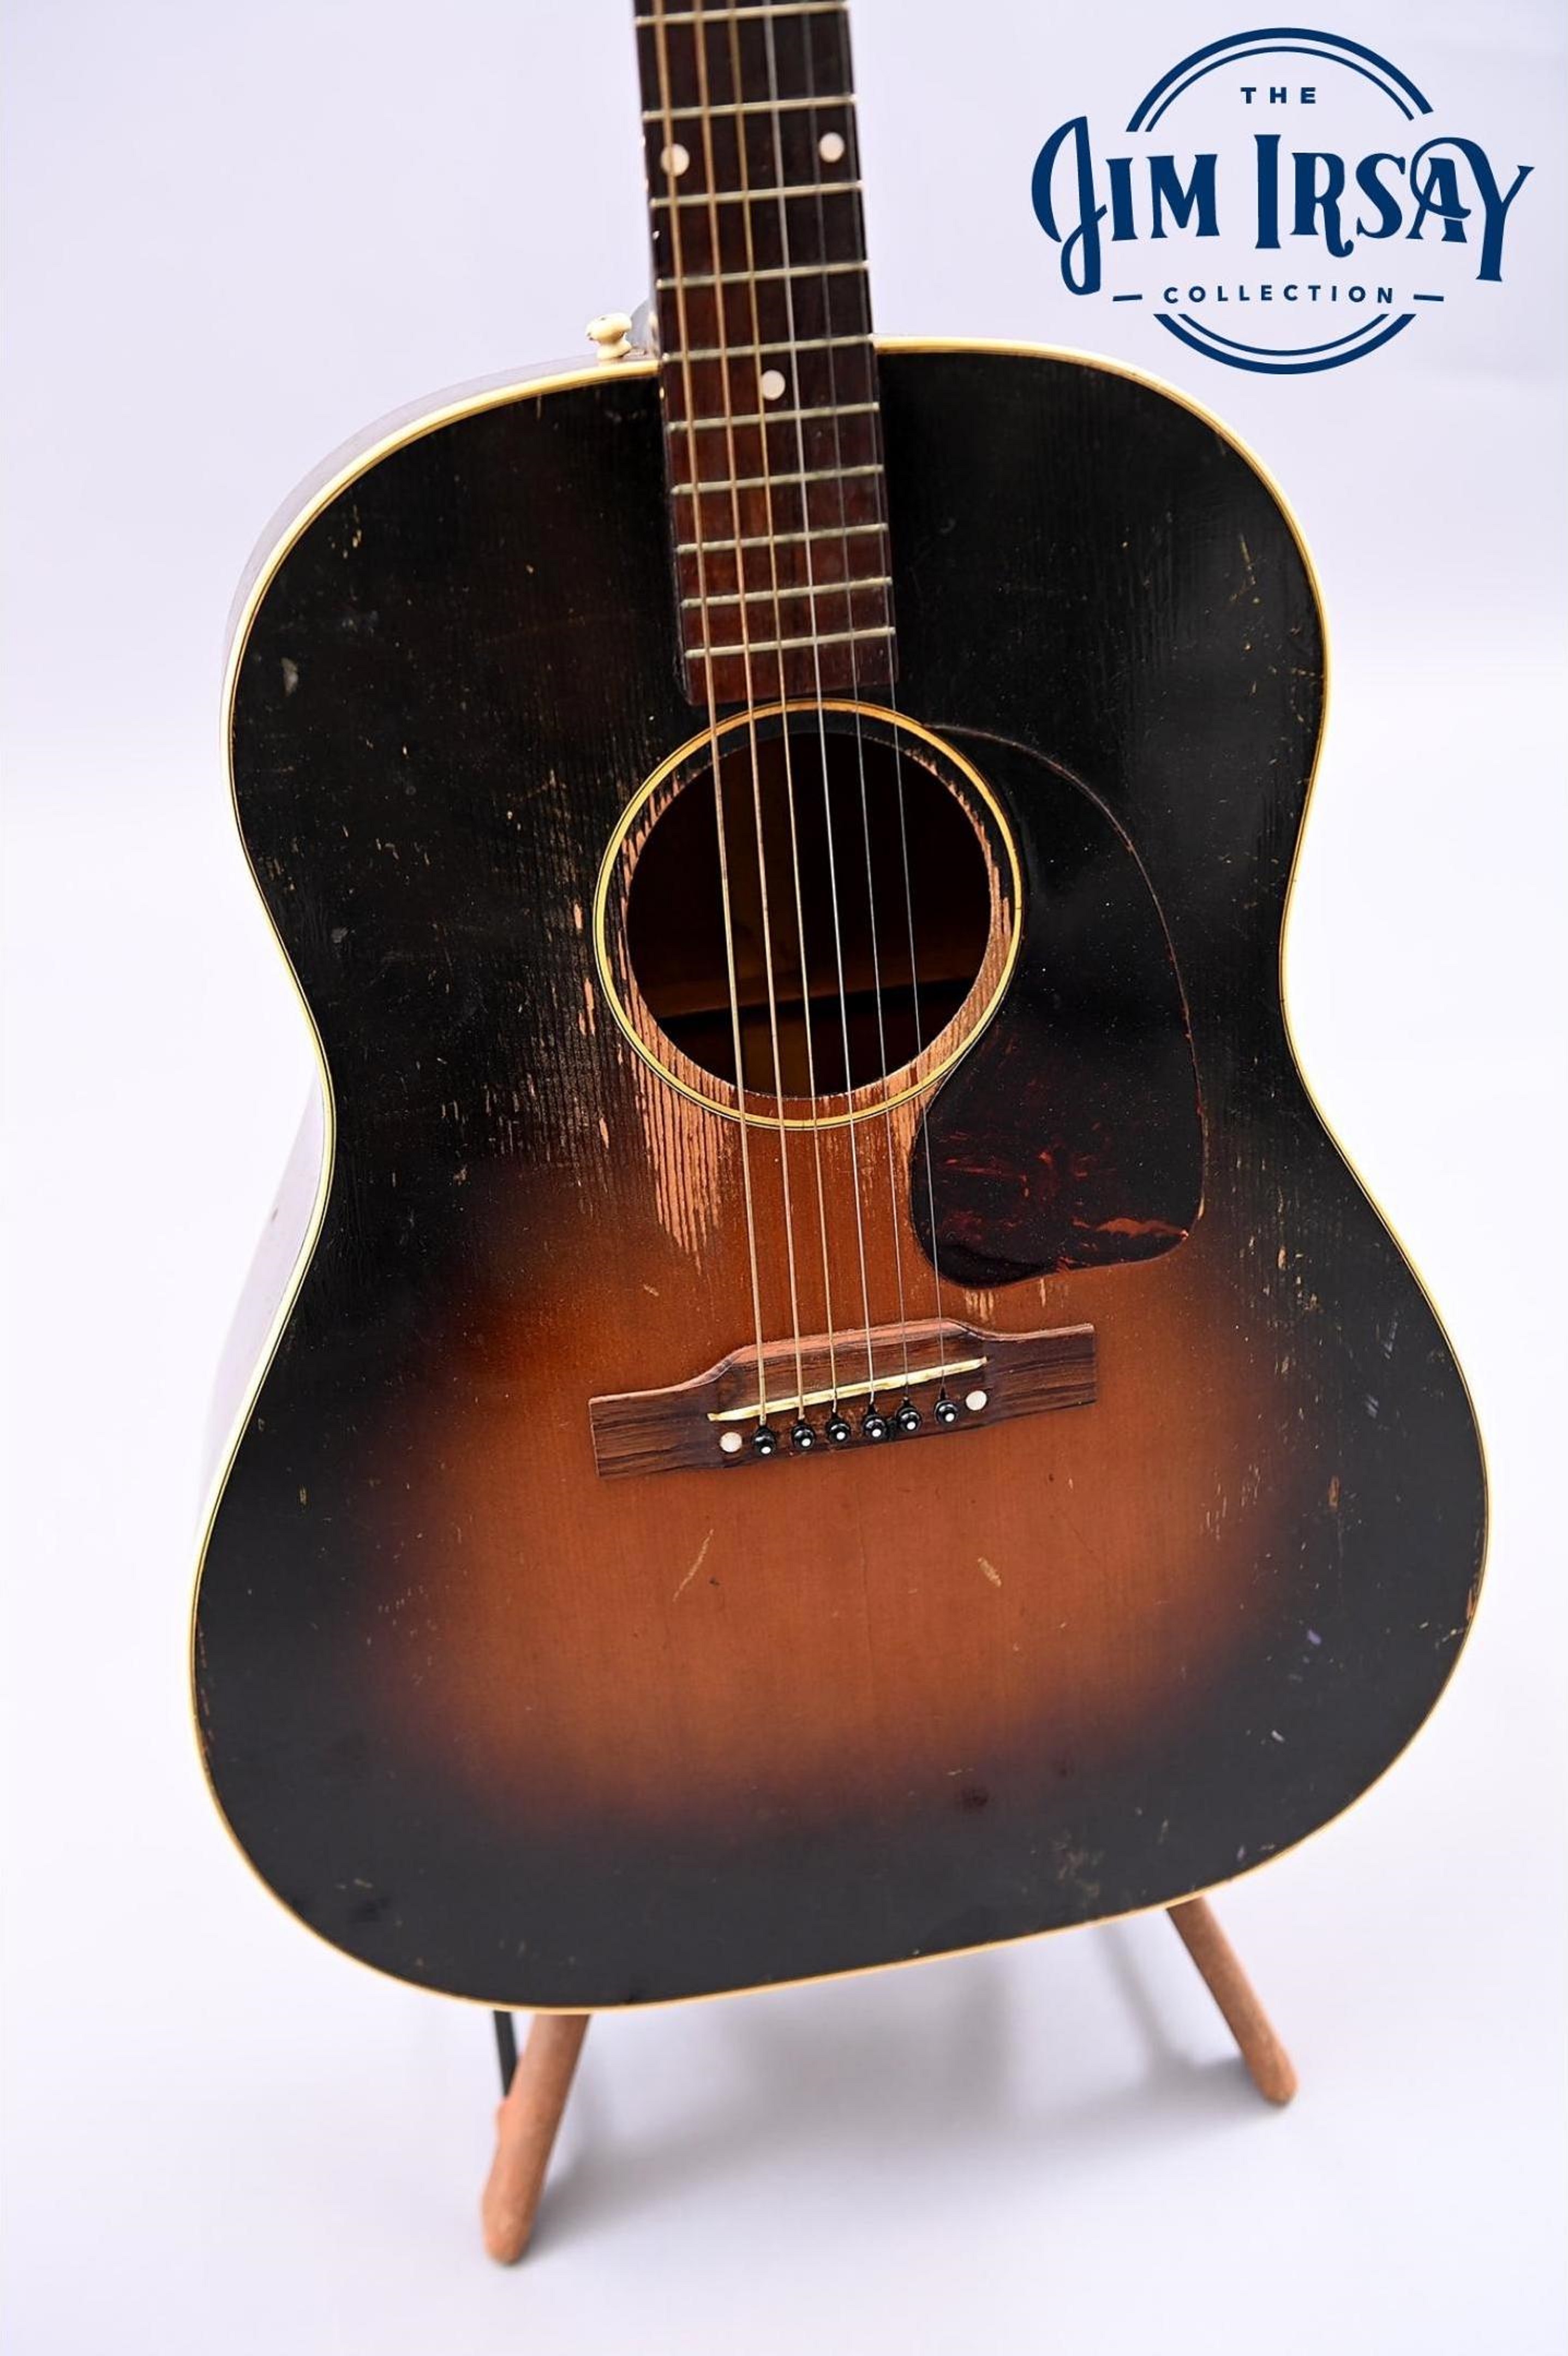 Jim Irsay Collection acquires Janis Joplin "Me and Bobby McGee" acoustic guitar